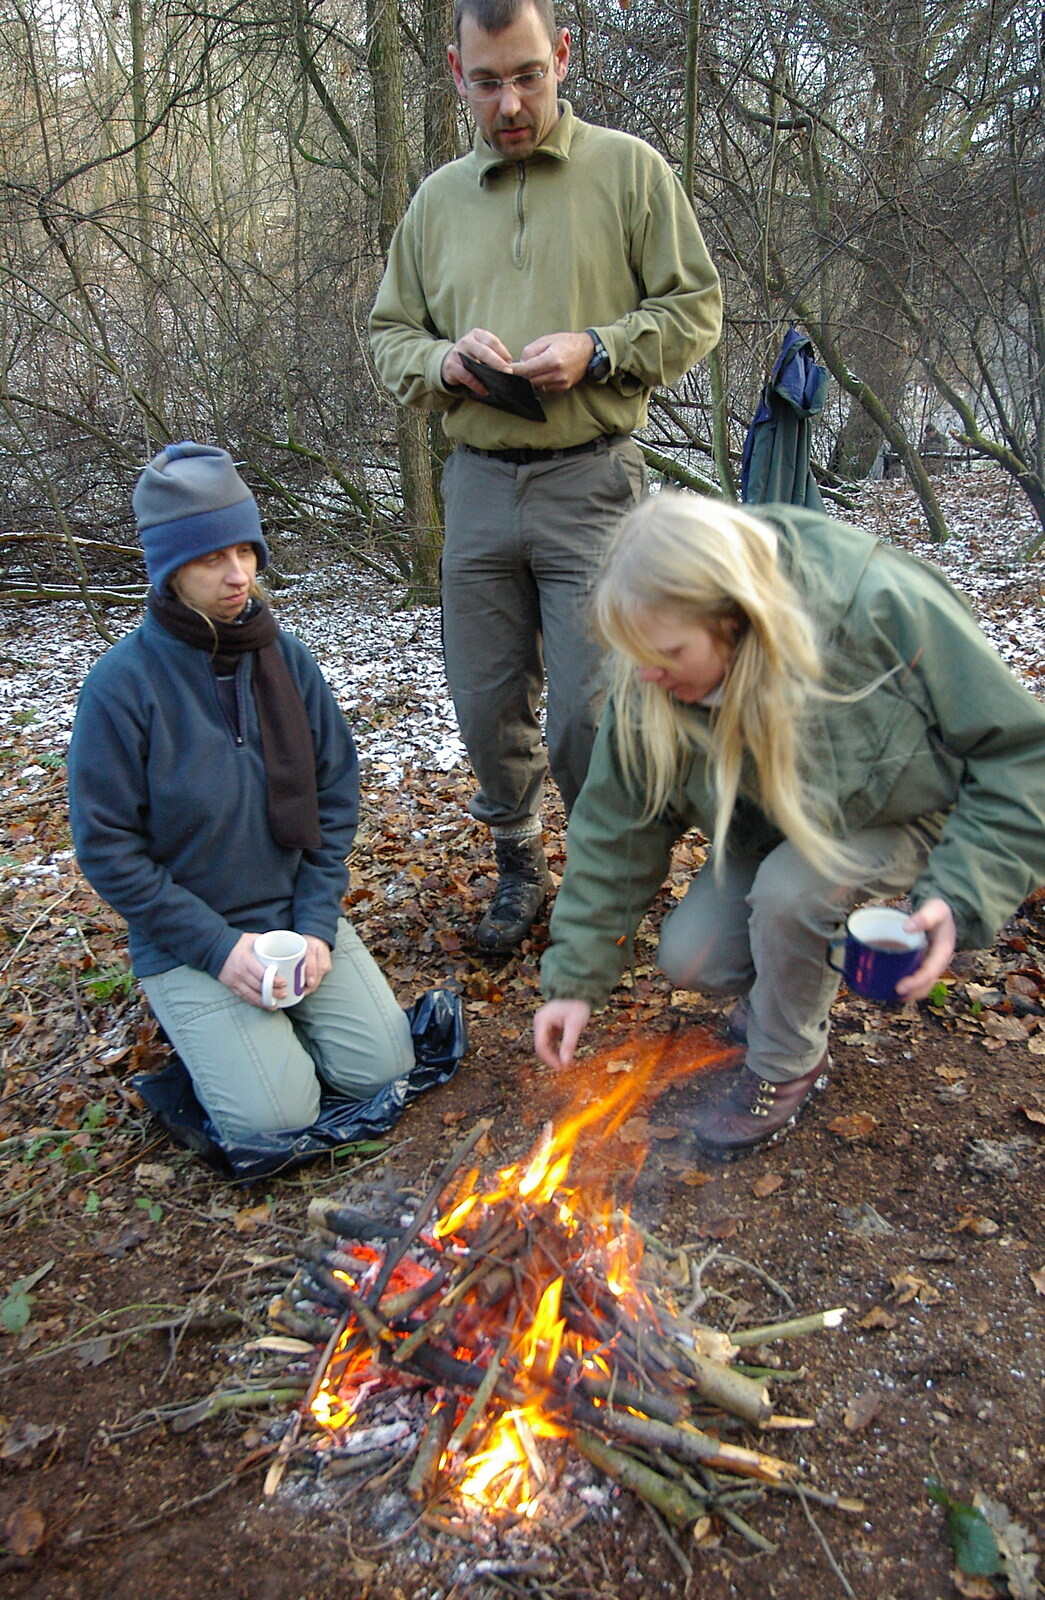 Our camp fire gets going as Annette inspects from Walk Like a Shadow: A Day With Ray Mears, Ashdown Forest, East Sussex - 29th December 2005